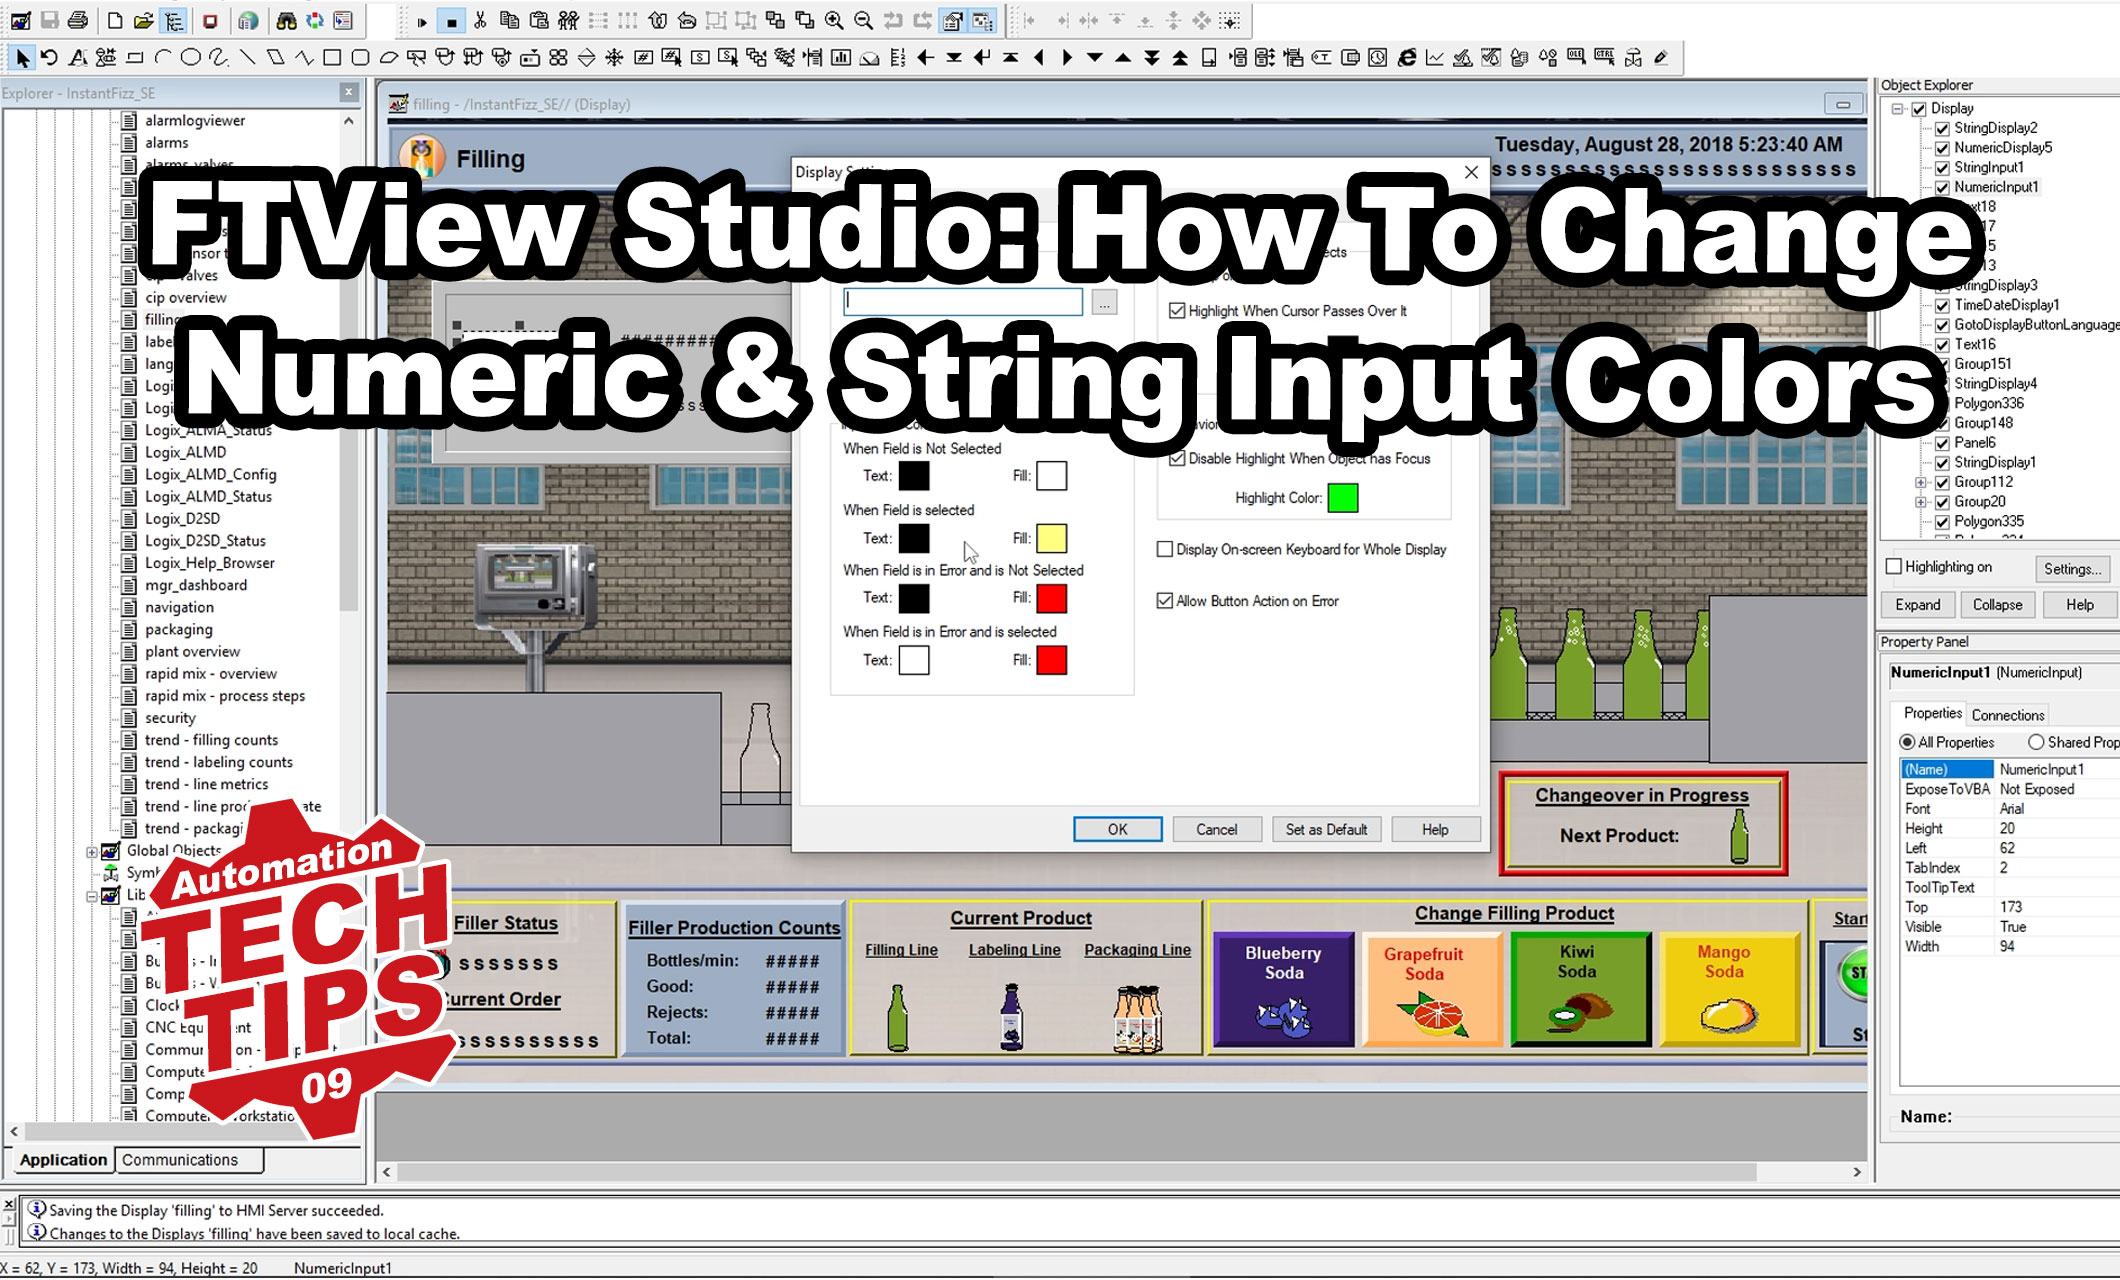 View Studio Site Edition - Numeric & String Input Colors & Styles (T009)